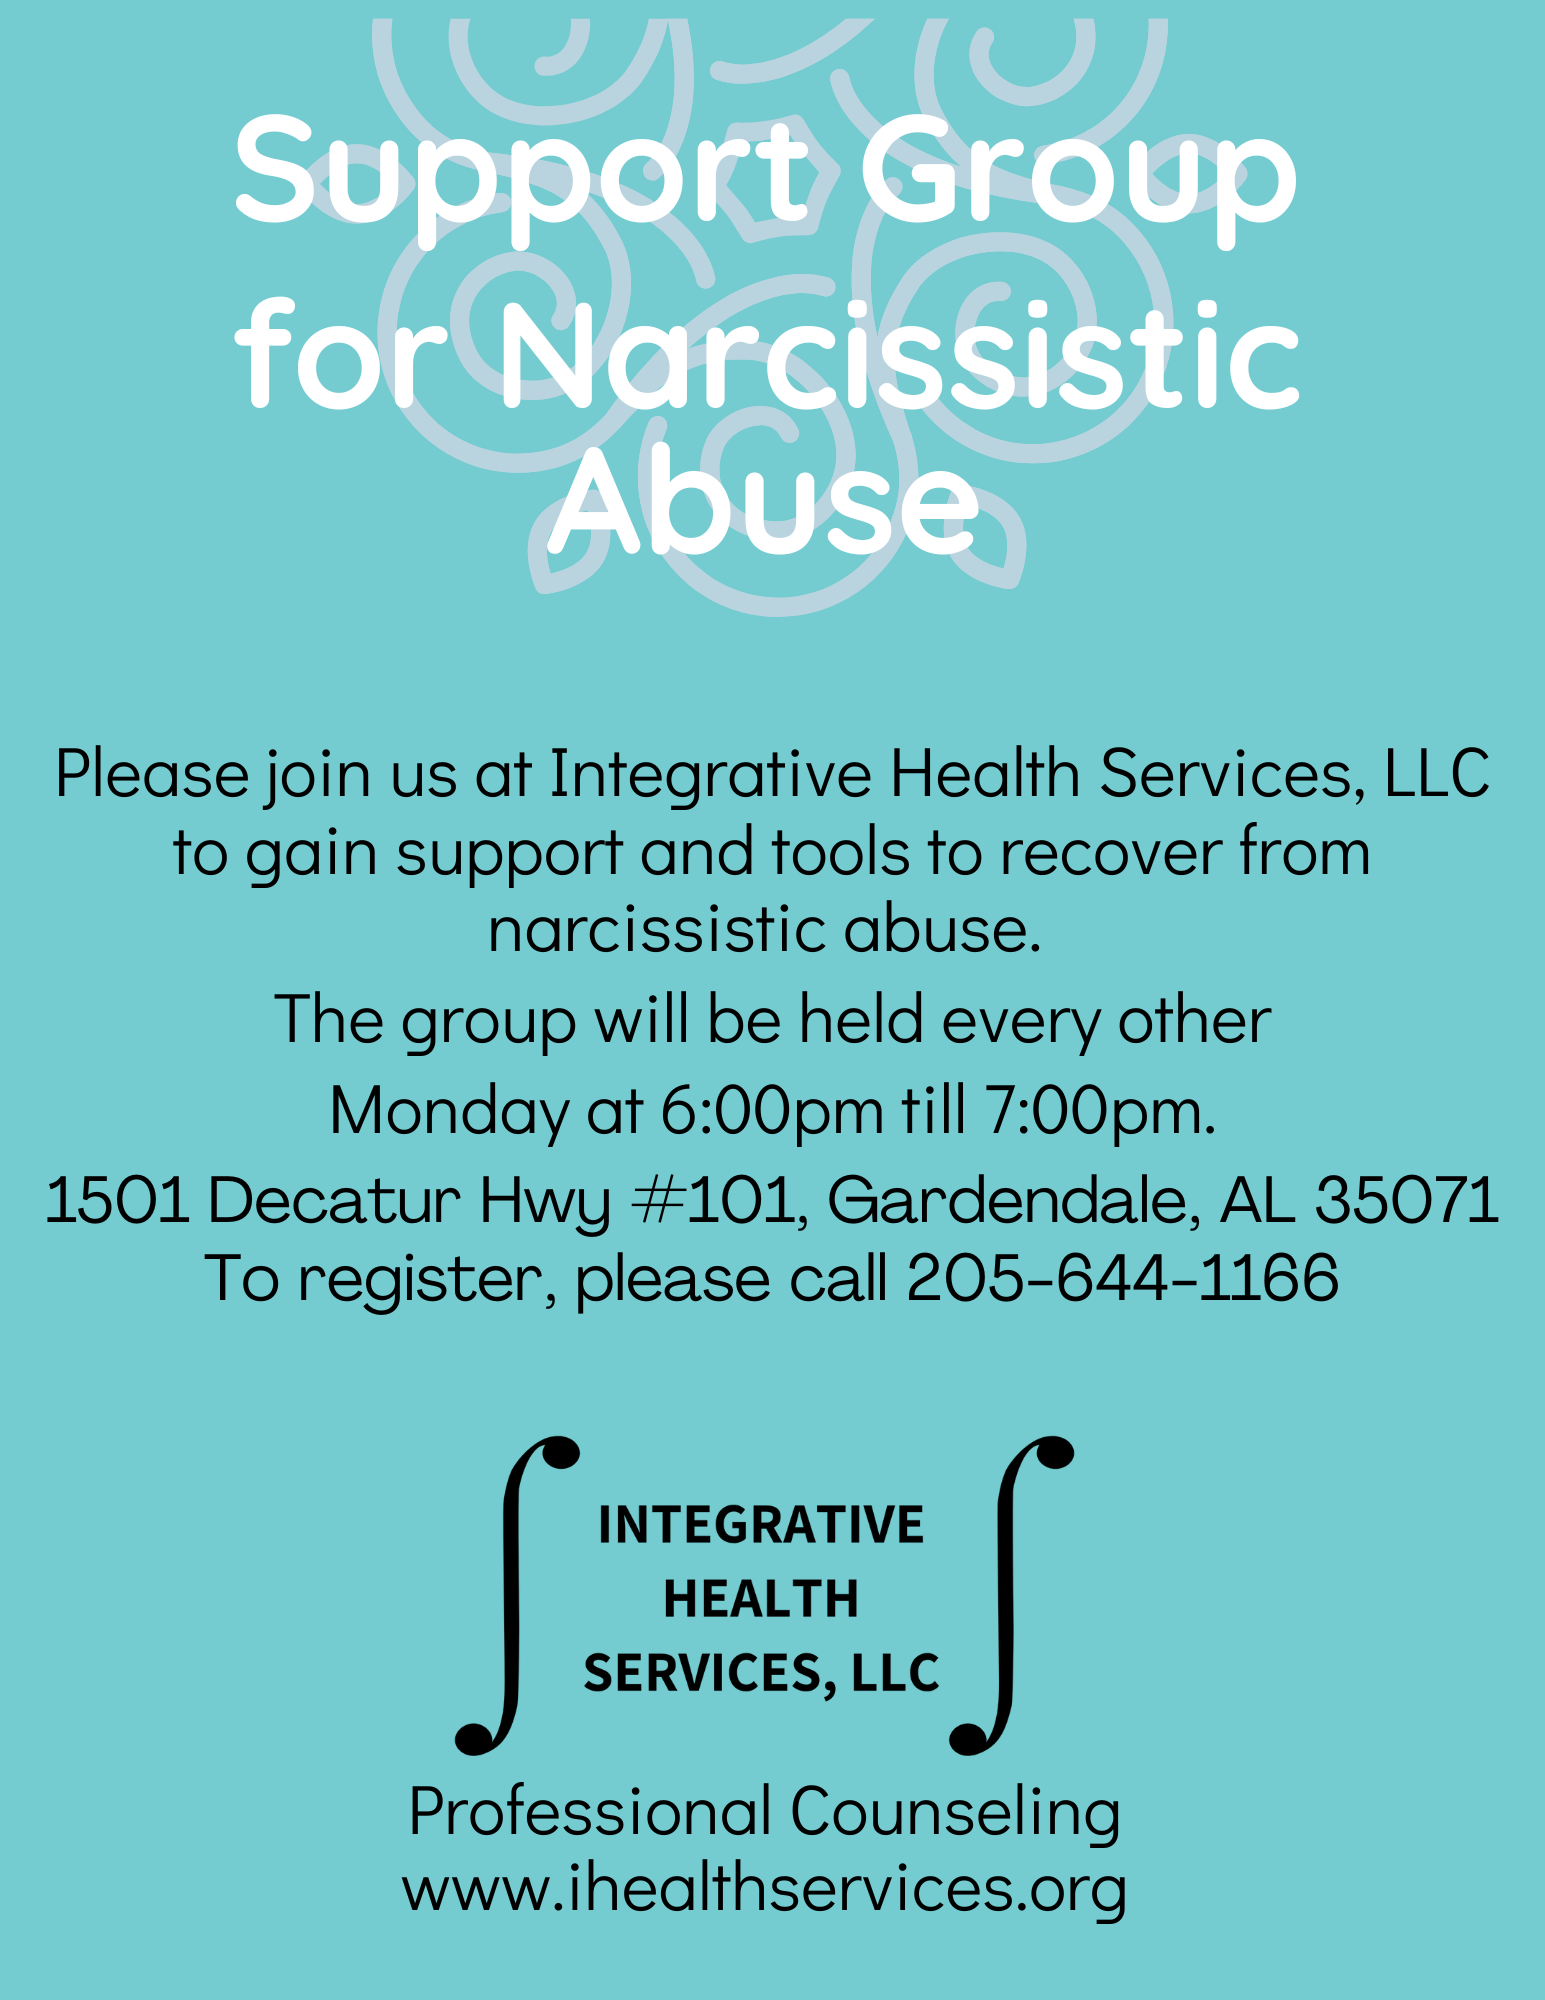 integrative health services llc counseling therapy and therapists in birmingham al picture for narcissist narcissism and narcissistic abuse support group